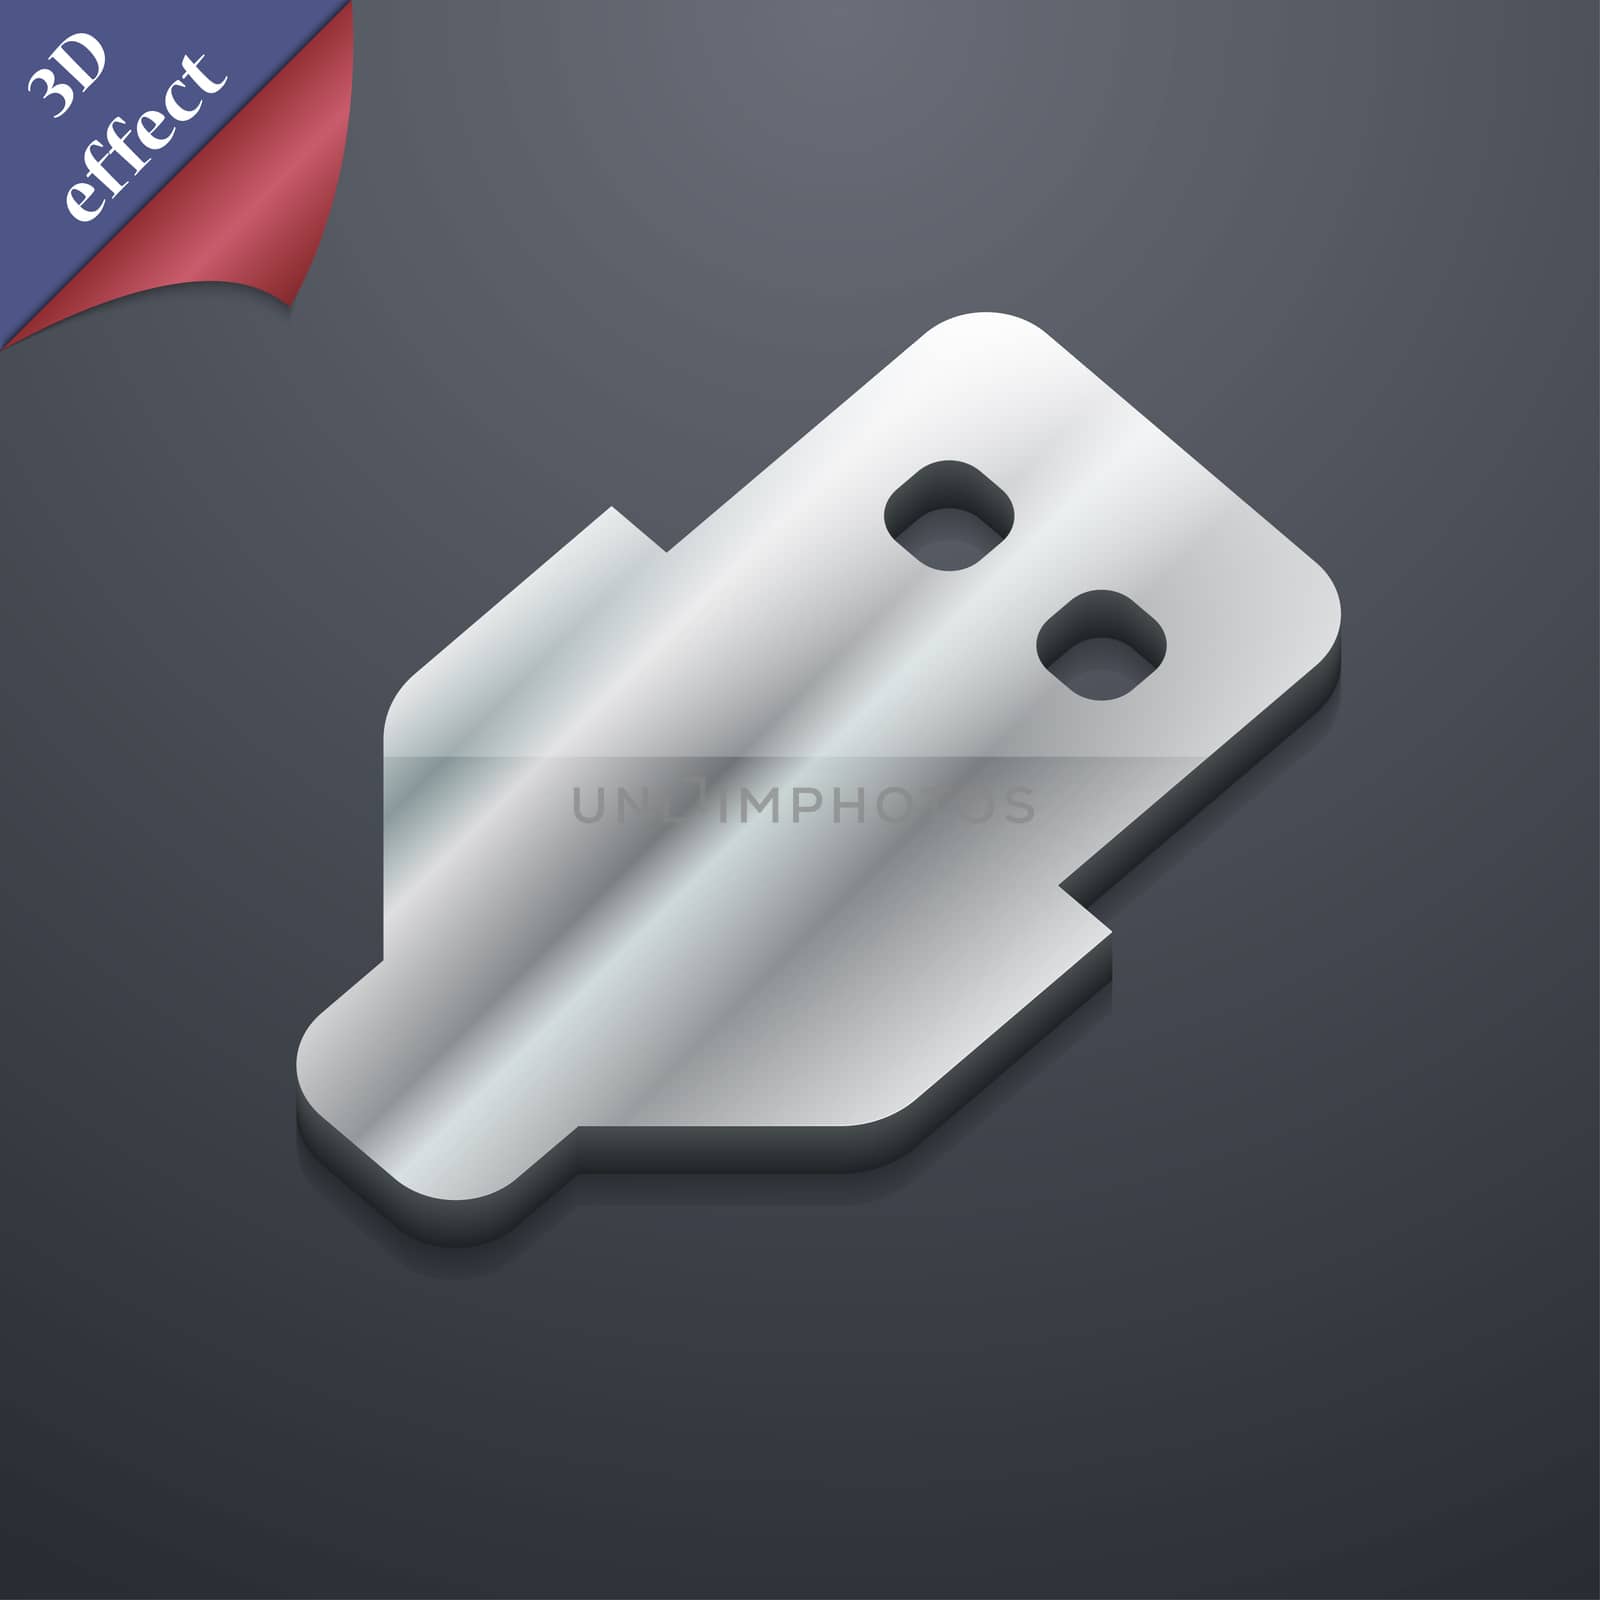 USB icon symbol. 3D style. Trendy, modern design with space for your text illustration. Rastrized copy